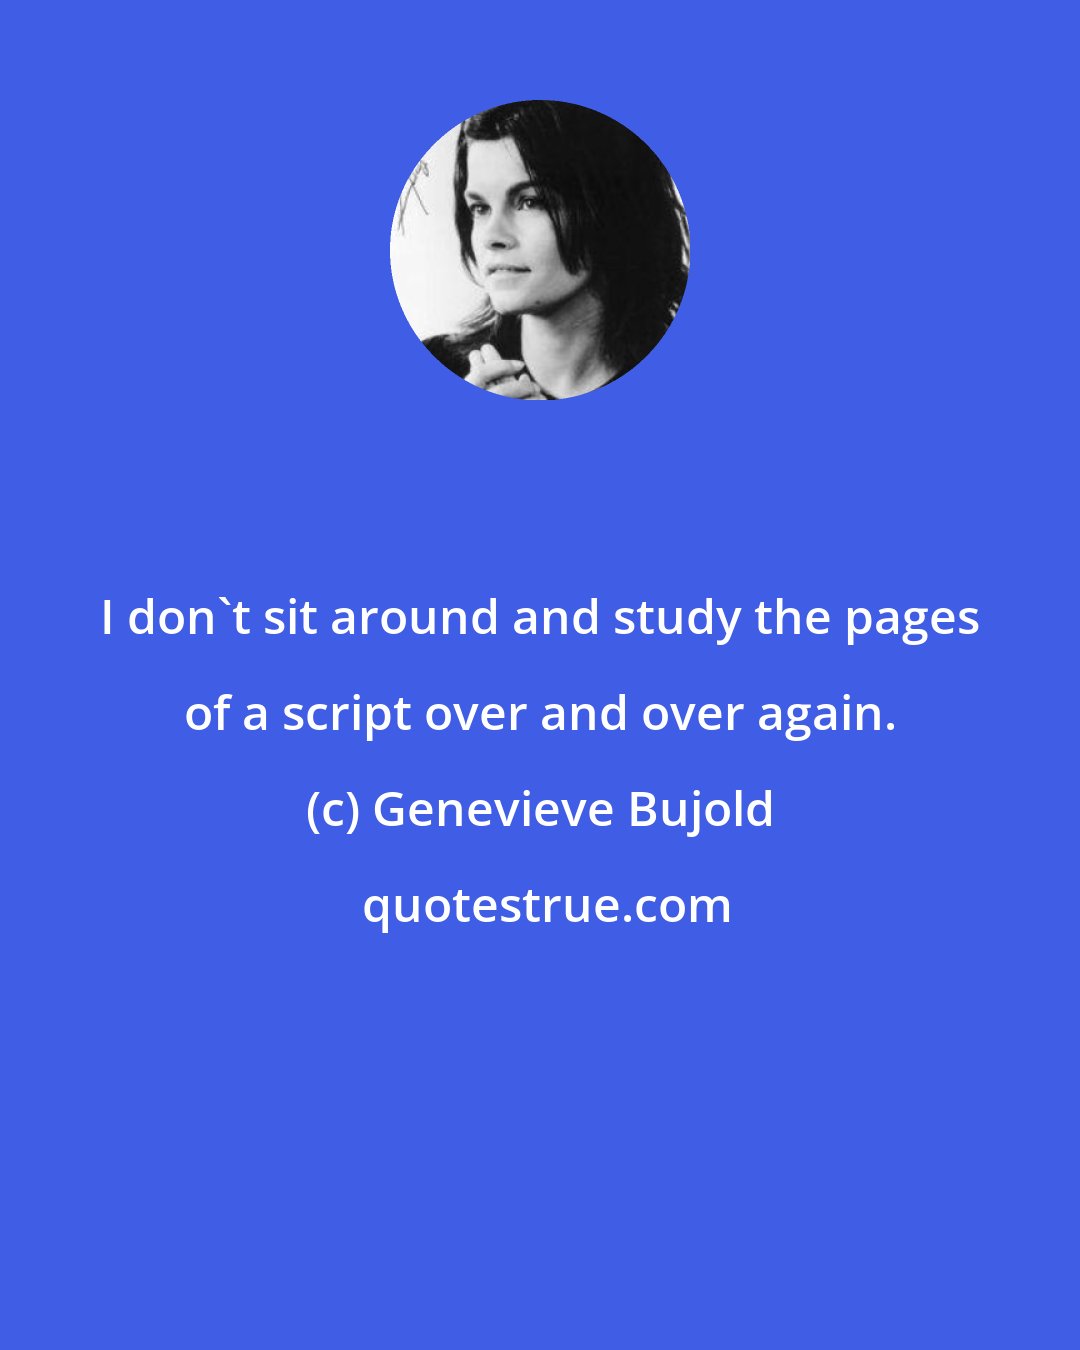 Genevieve Bujold: I don't sit around and study the pages of a script over and over again.